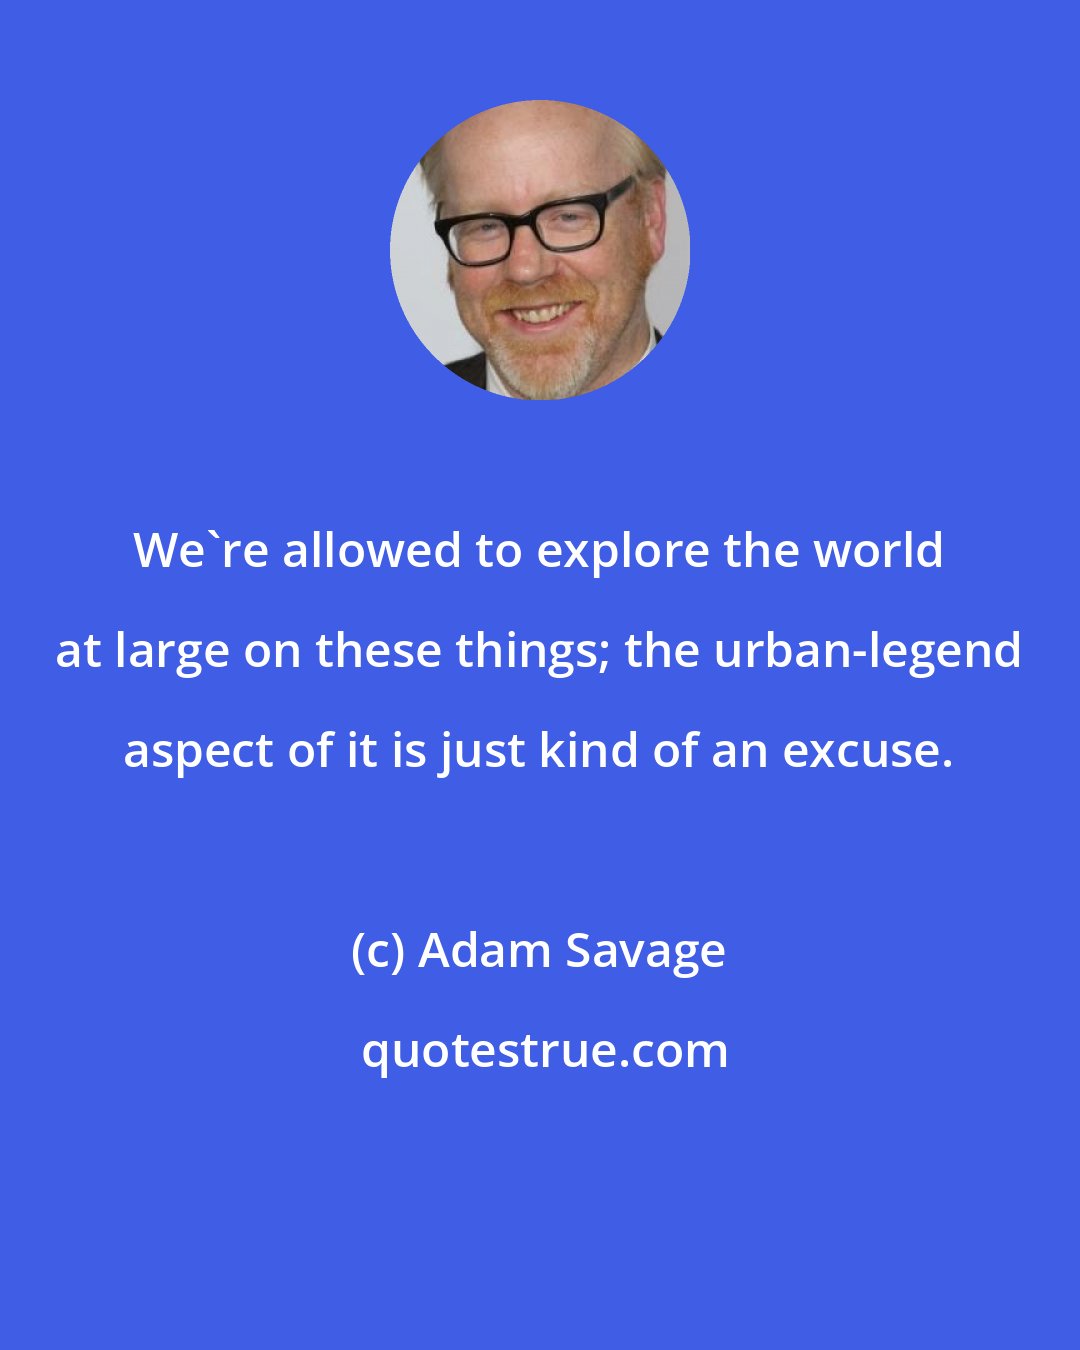 Adam Savage: We're allowed to explore the world at large on these things; the urban-legend aspect of it is just kind of an excuse.